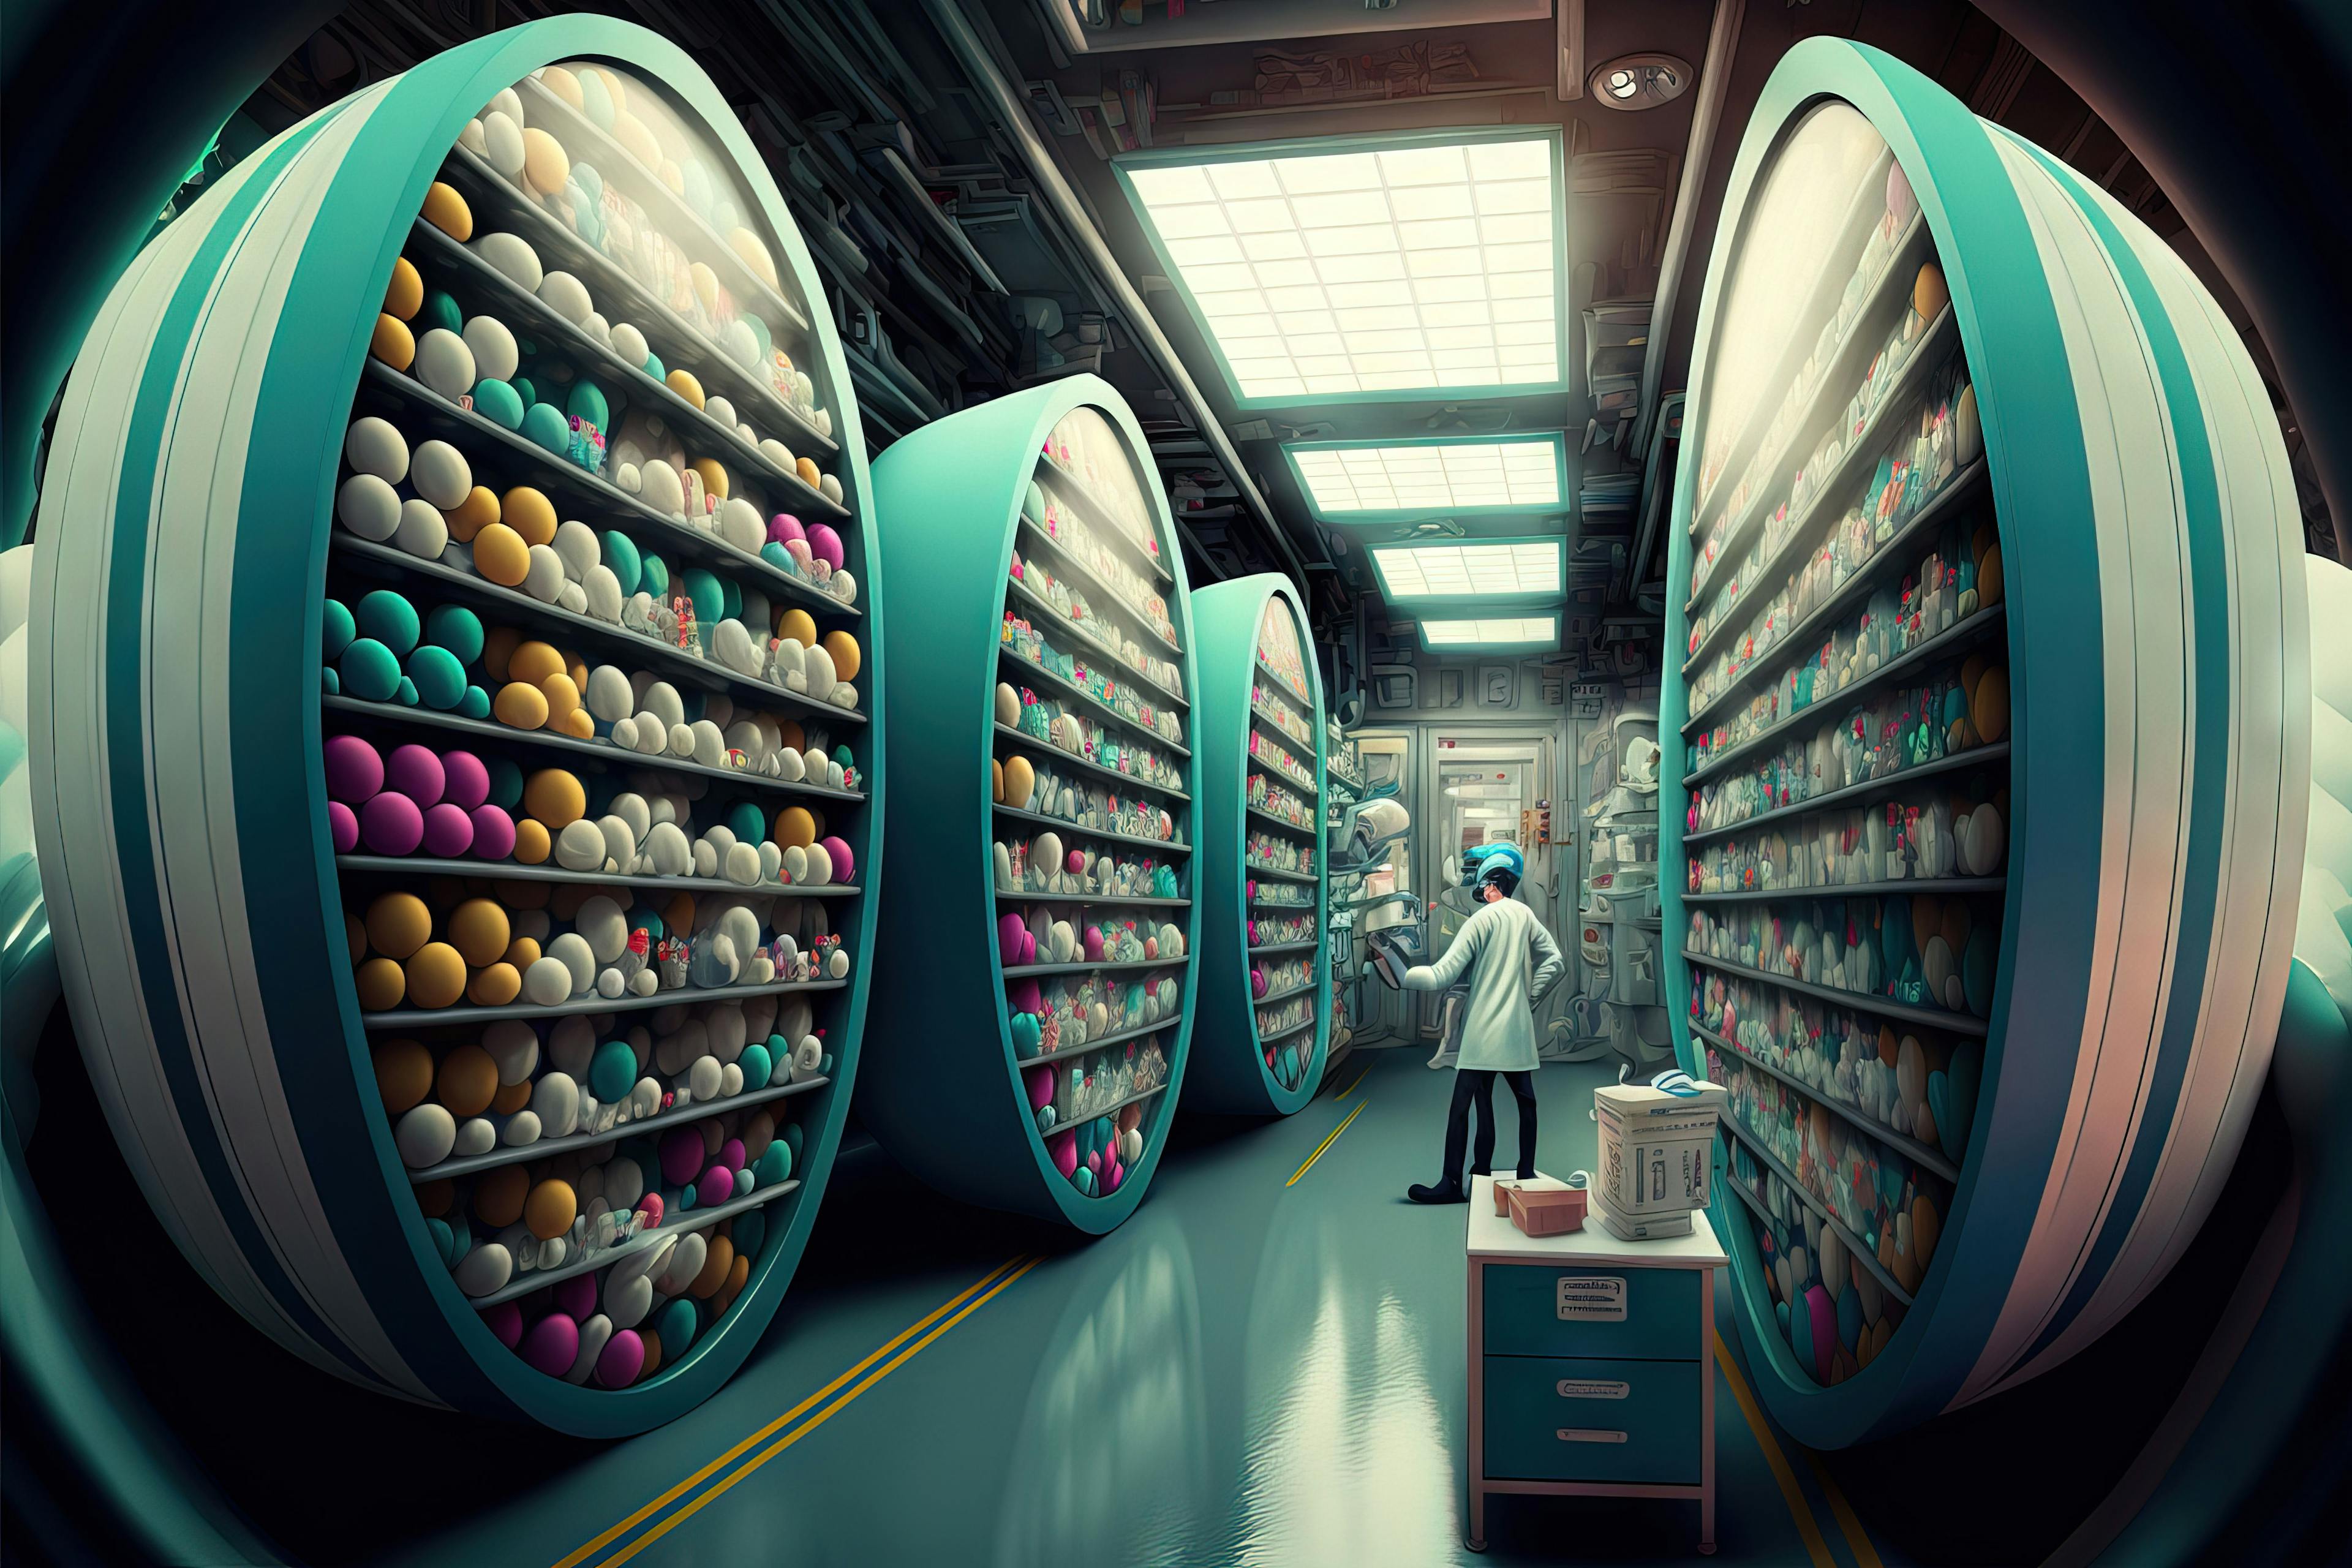 Pharmaceutical Pill Factory Illustrated in a Retro Style. Photo Credit: Adobe Stock Images/Sebastin